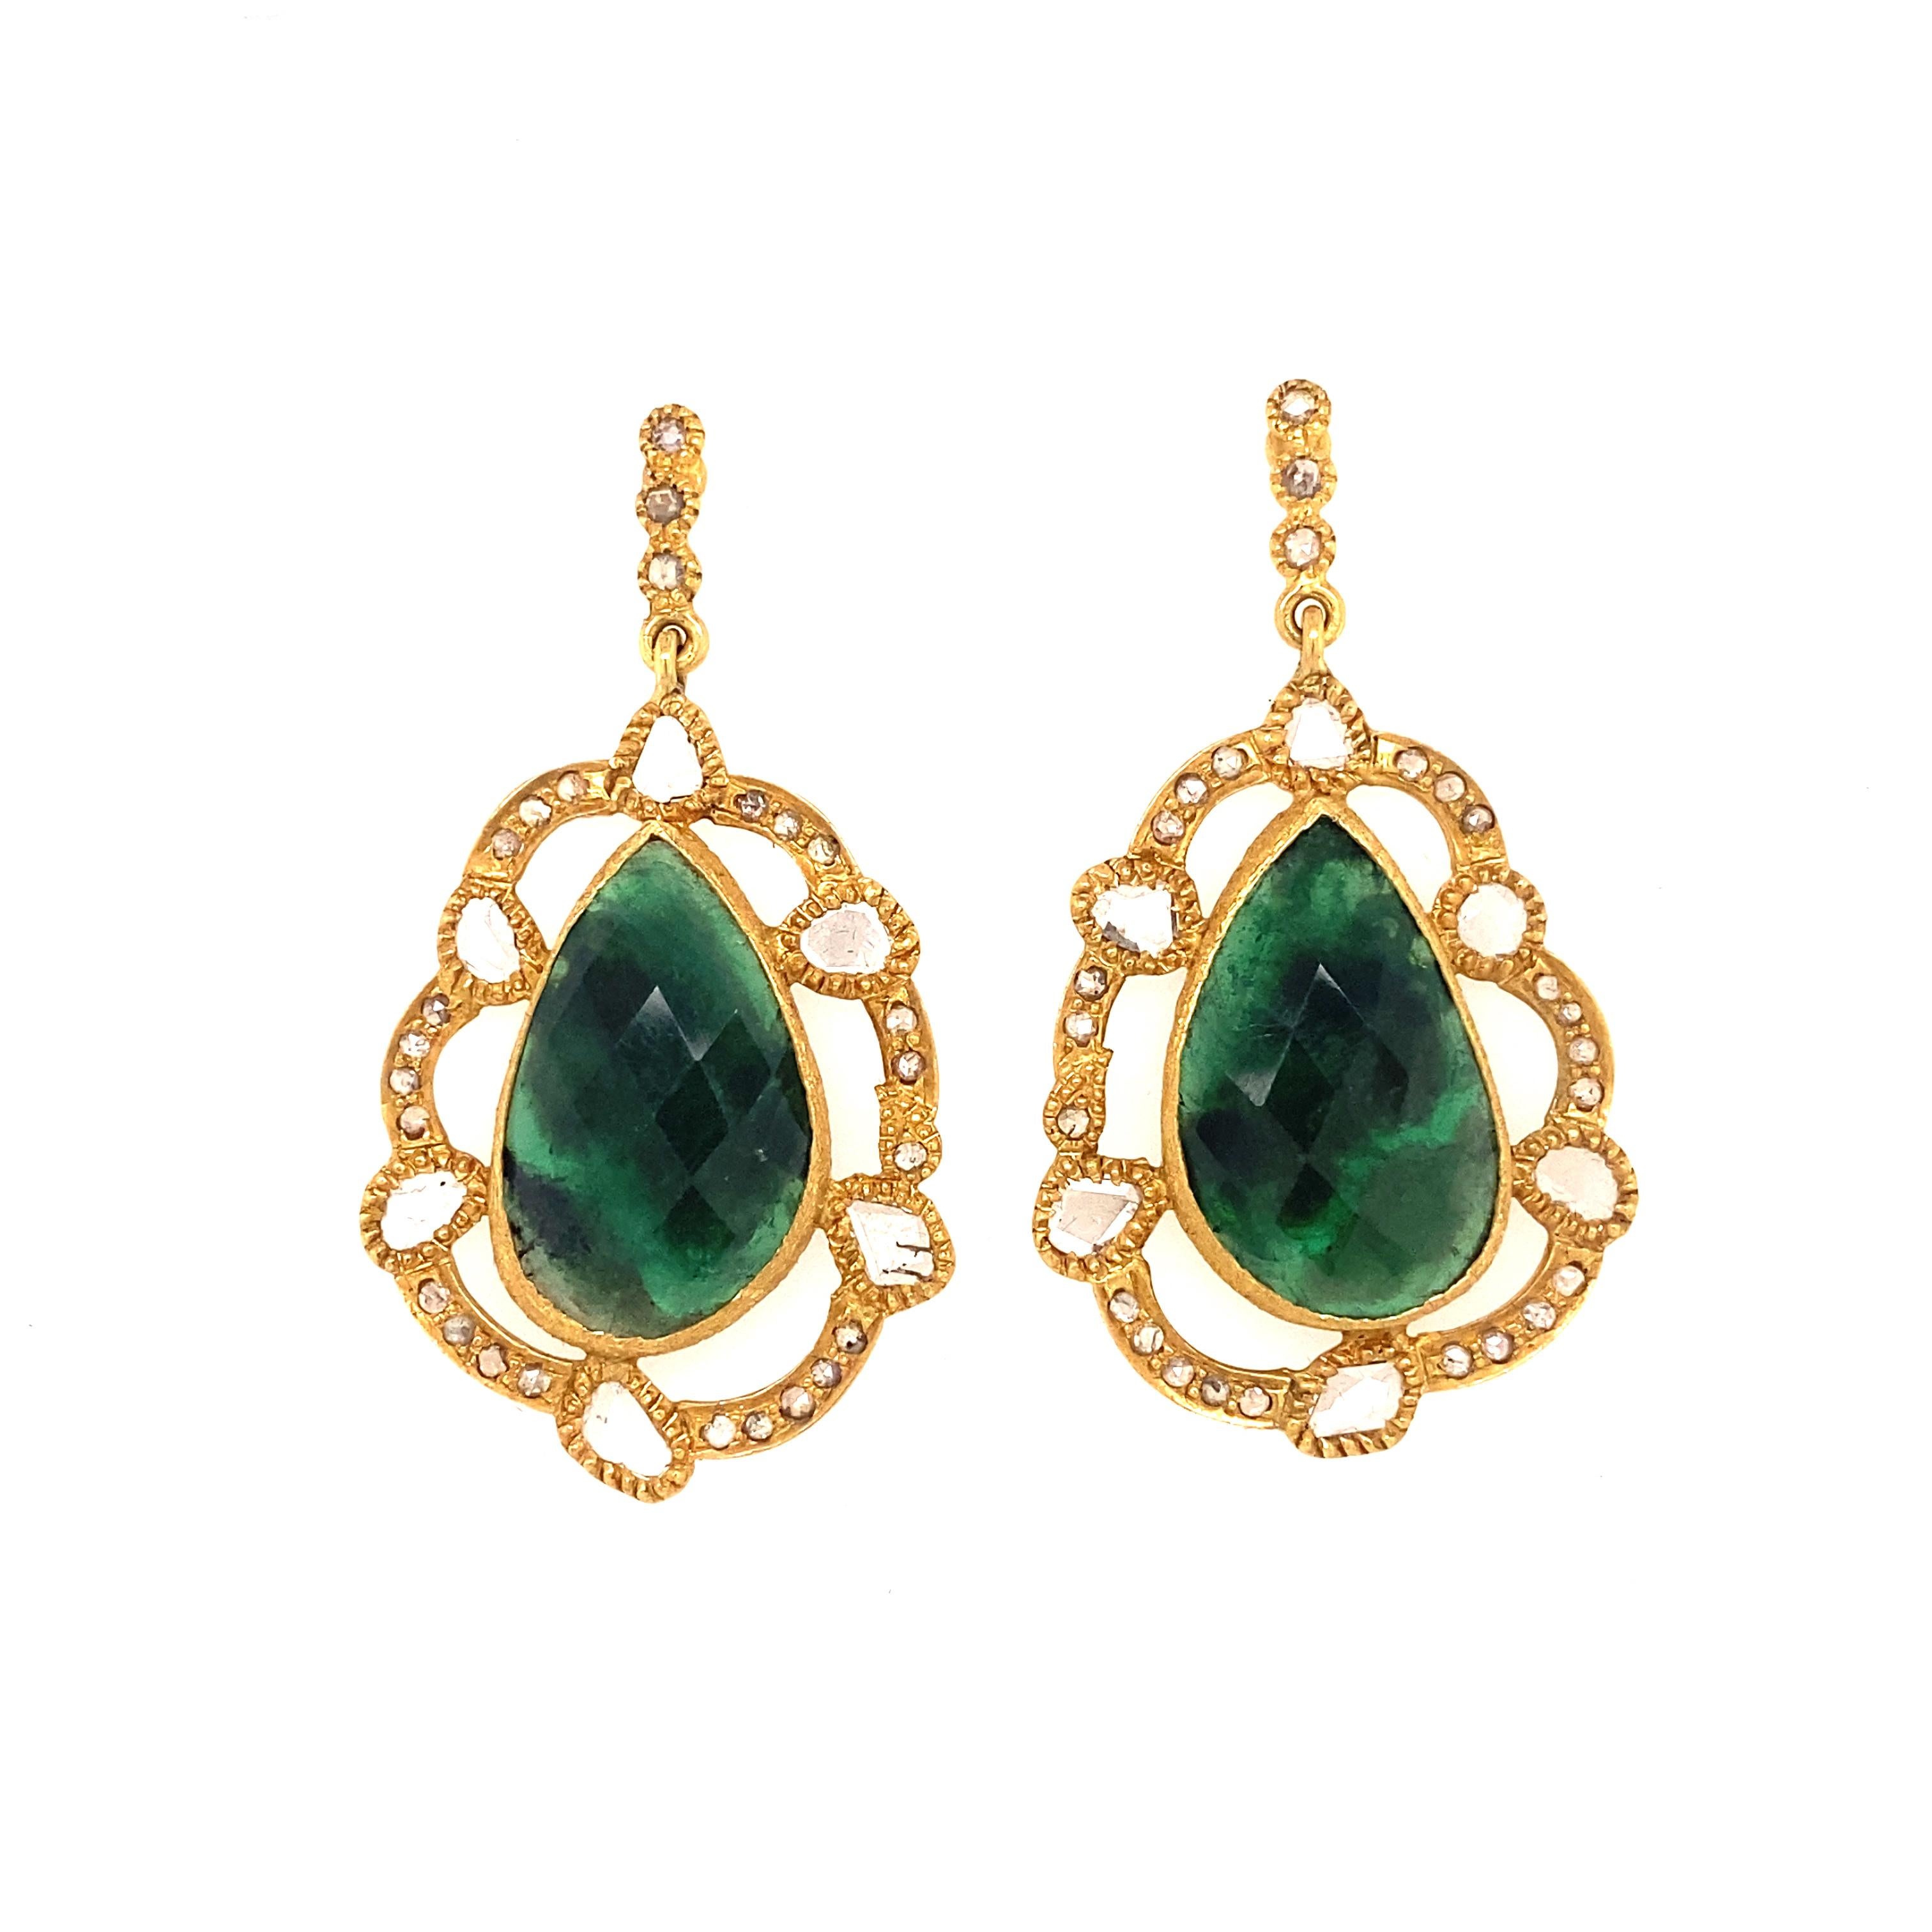 Rose Cut Marbled Emerald Slice Earrings with 1.48 Carat Diamonds